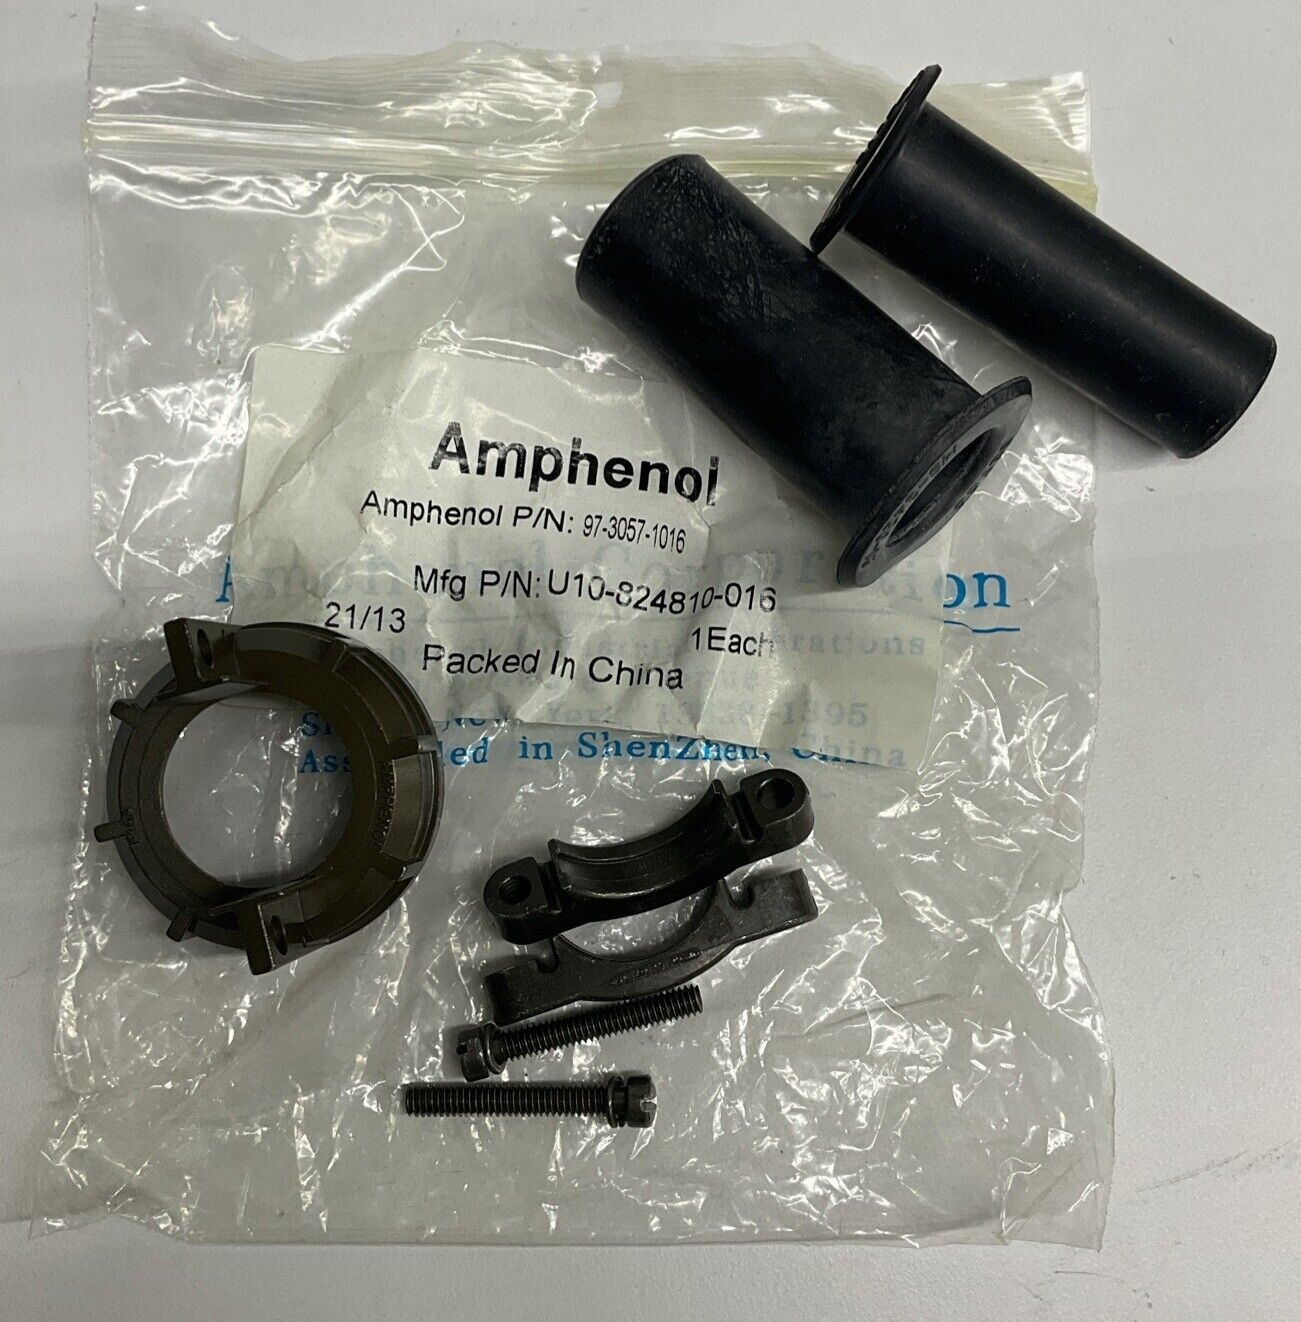 Amphenol 97-3057-1016-1 Cable Clamp w/ Rubber Bushing Size 24 28 (BK159) - 0